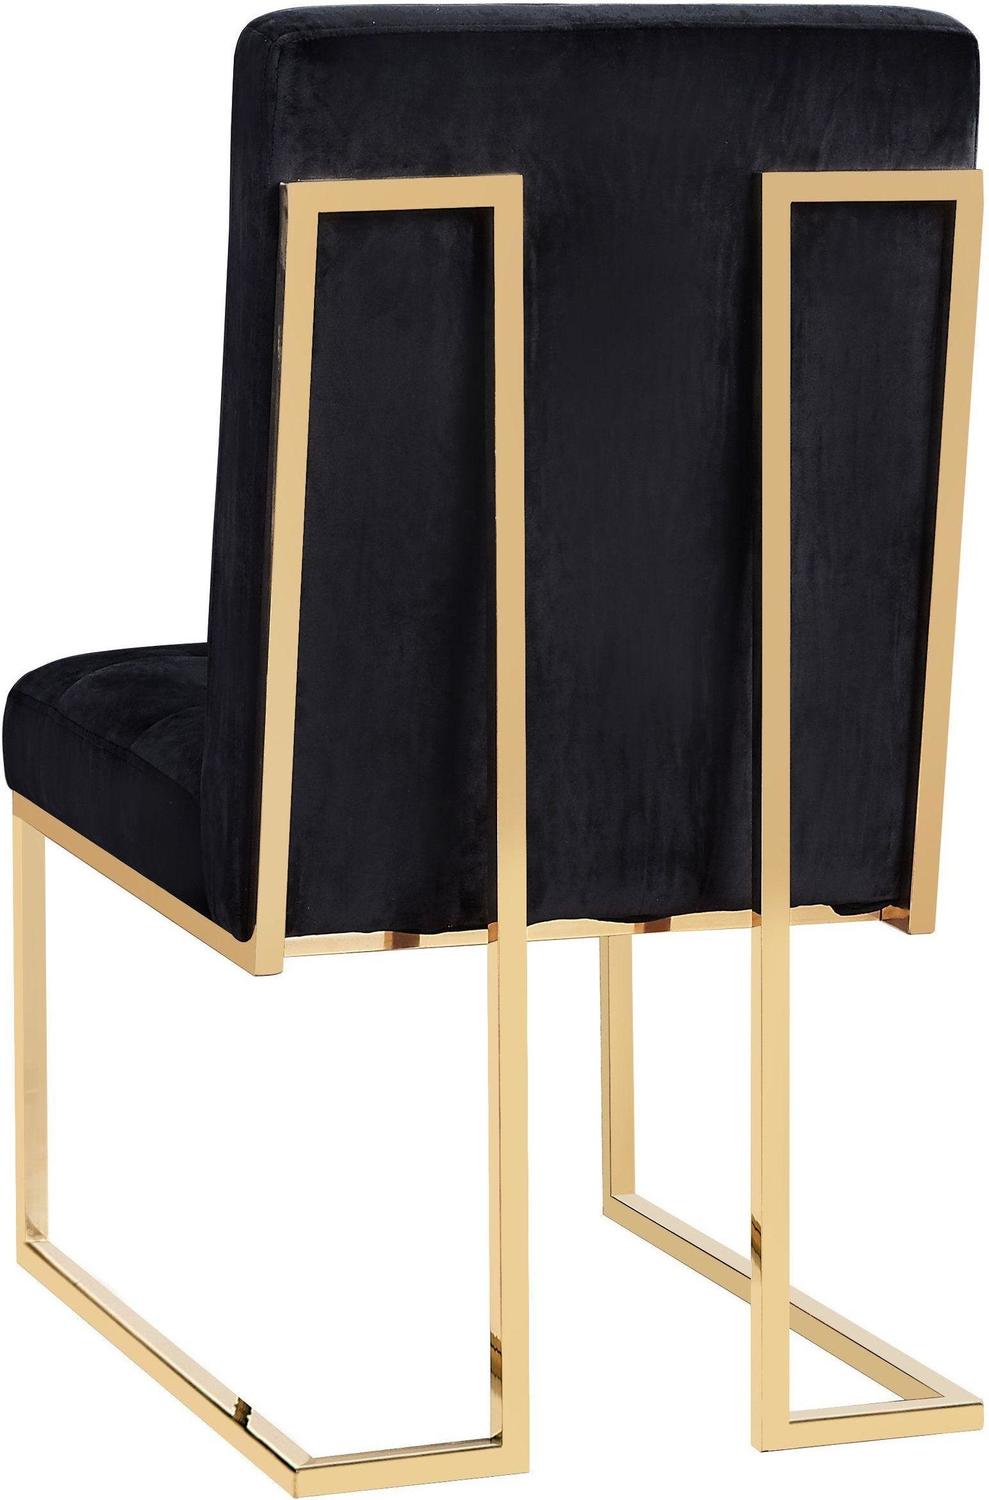 italian chair Contemporary Design Furniture Dining Chairs Black